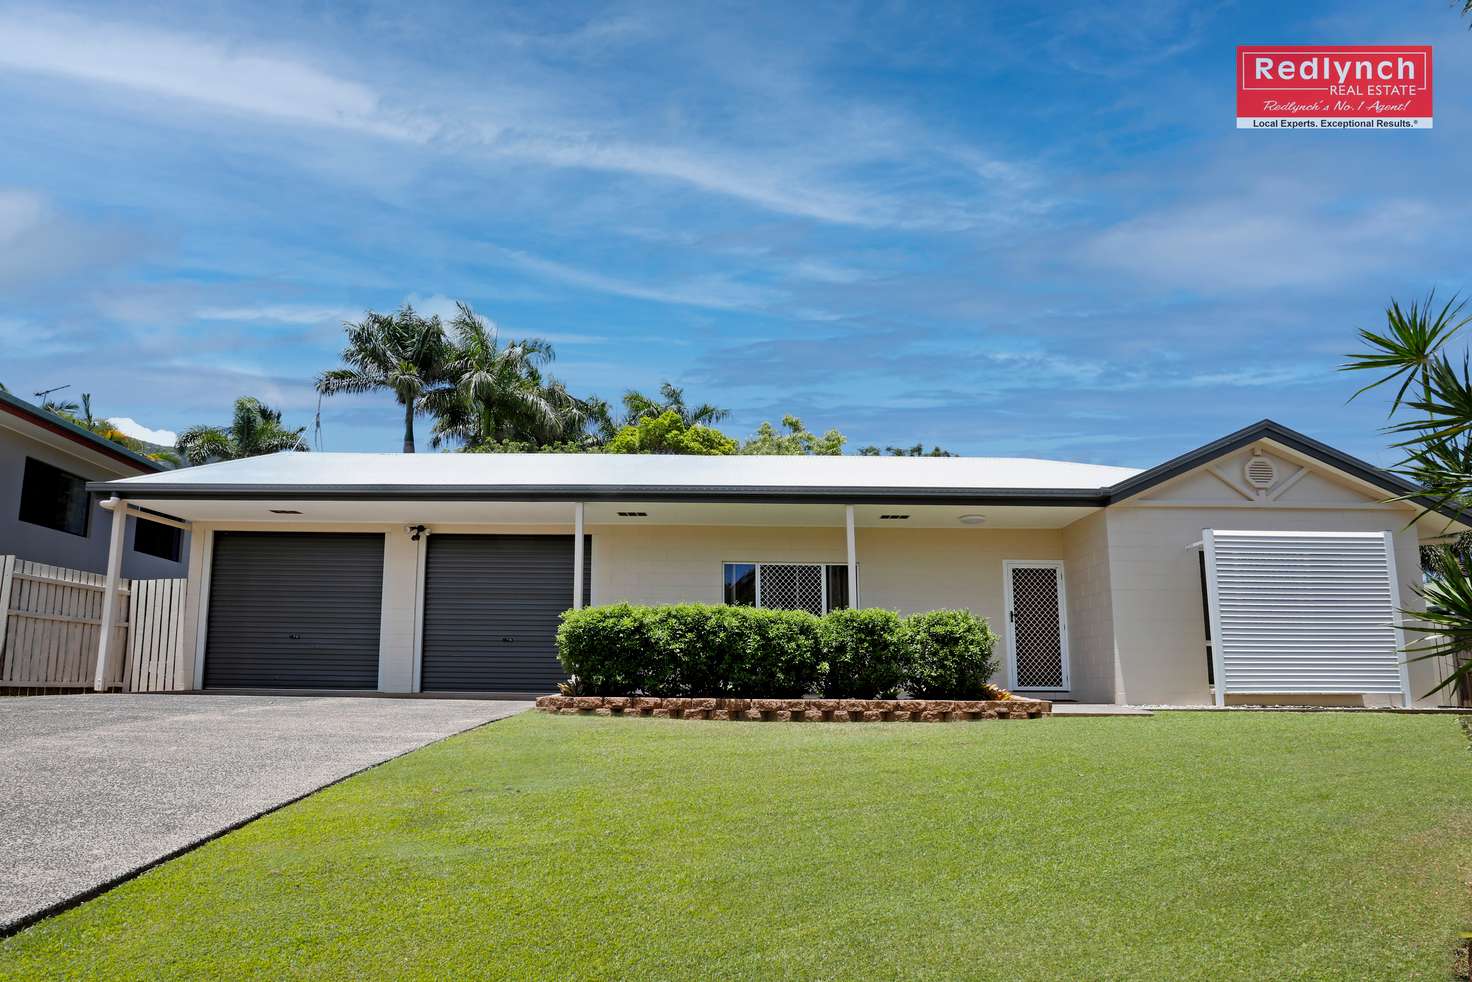 Main view of Homely house listing, 7 ROSEWOOD CLOSE, Redlynch QLD 4870